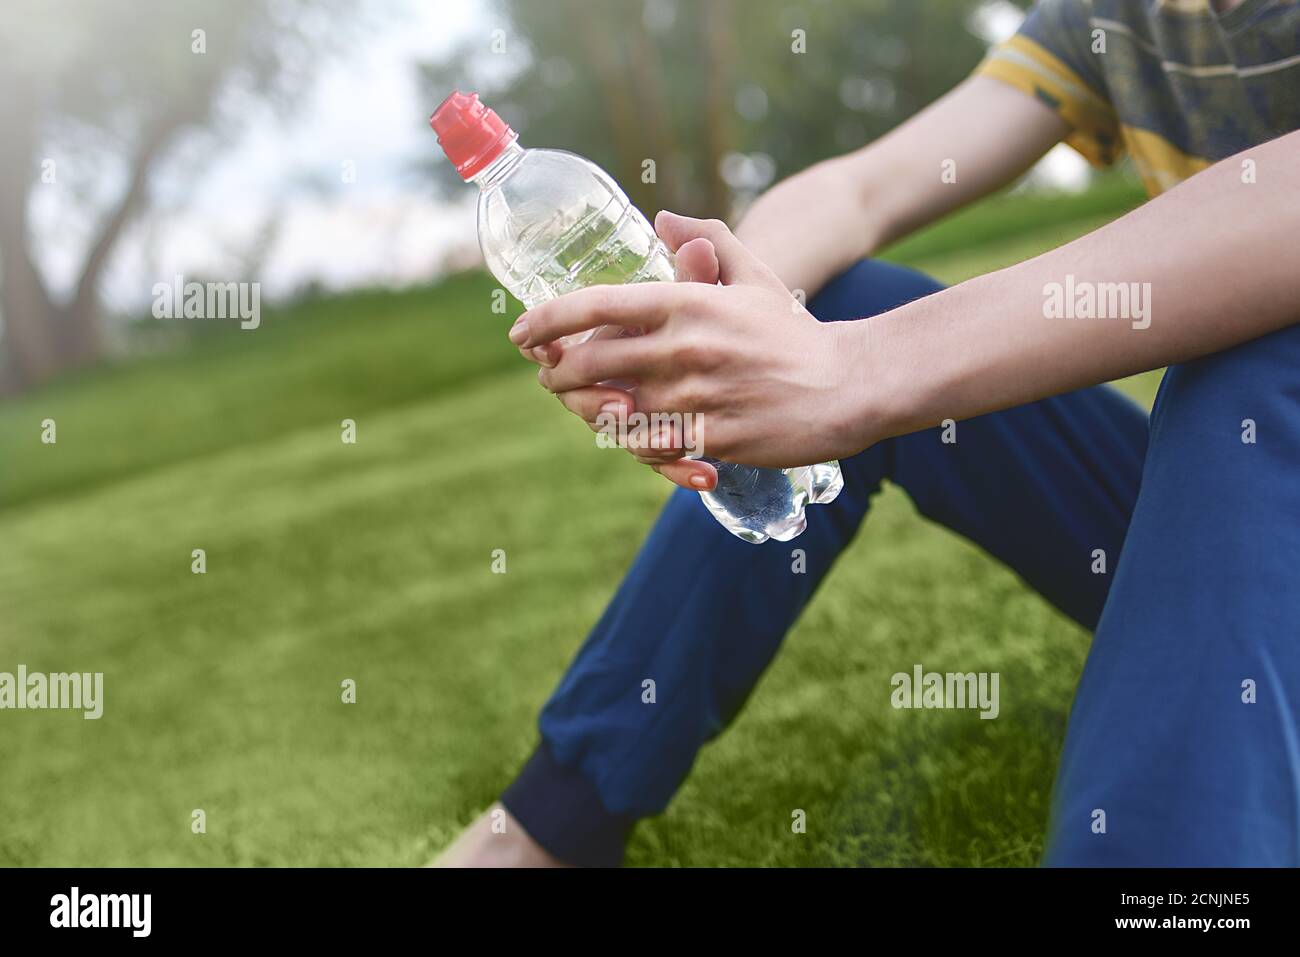 https://c8.alamy.com/comp/2CNJNE5/young-caucasian-man-runner-relaxing-holding-drinking-water-bottle-and-sitting-on-grass-in-the-park-outdoors-after-sport-at-early-2CNJNE5.jpg